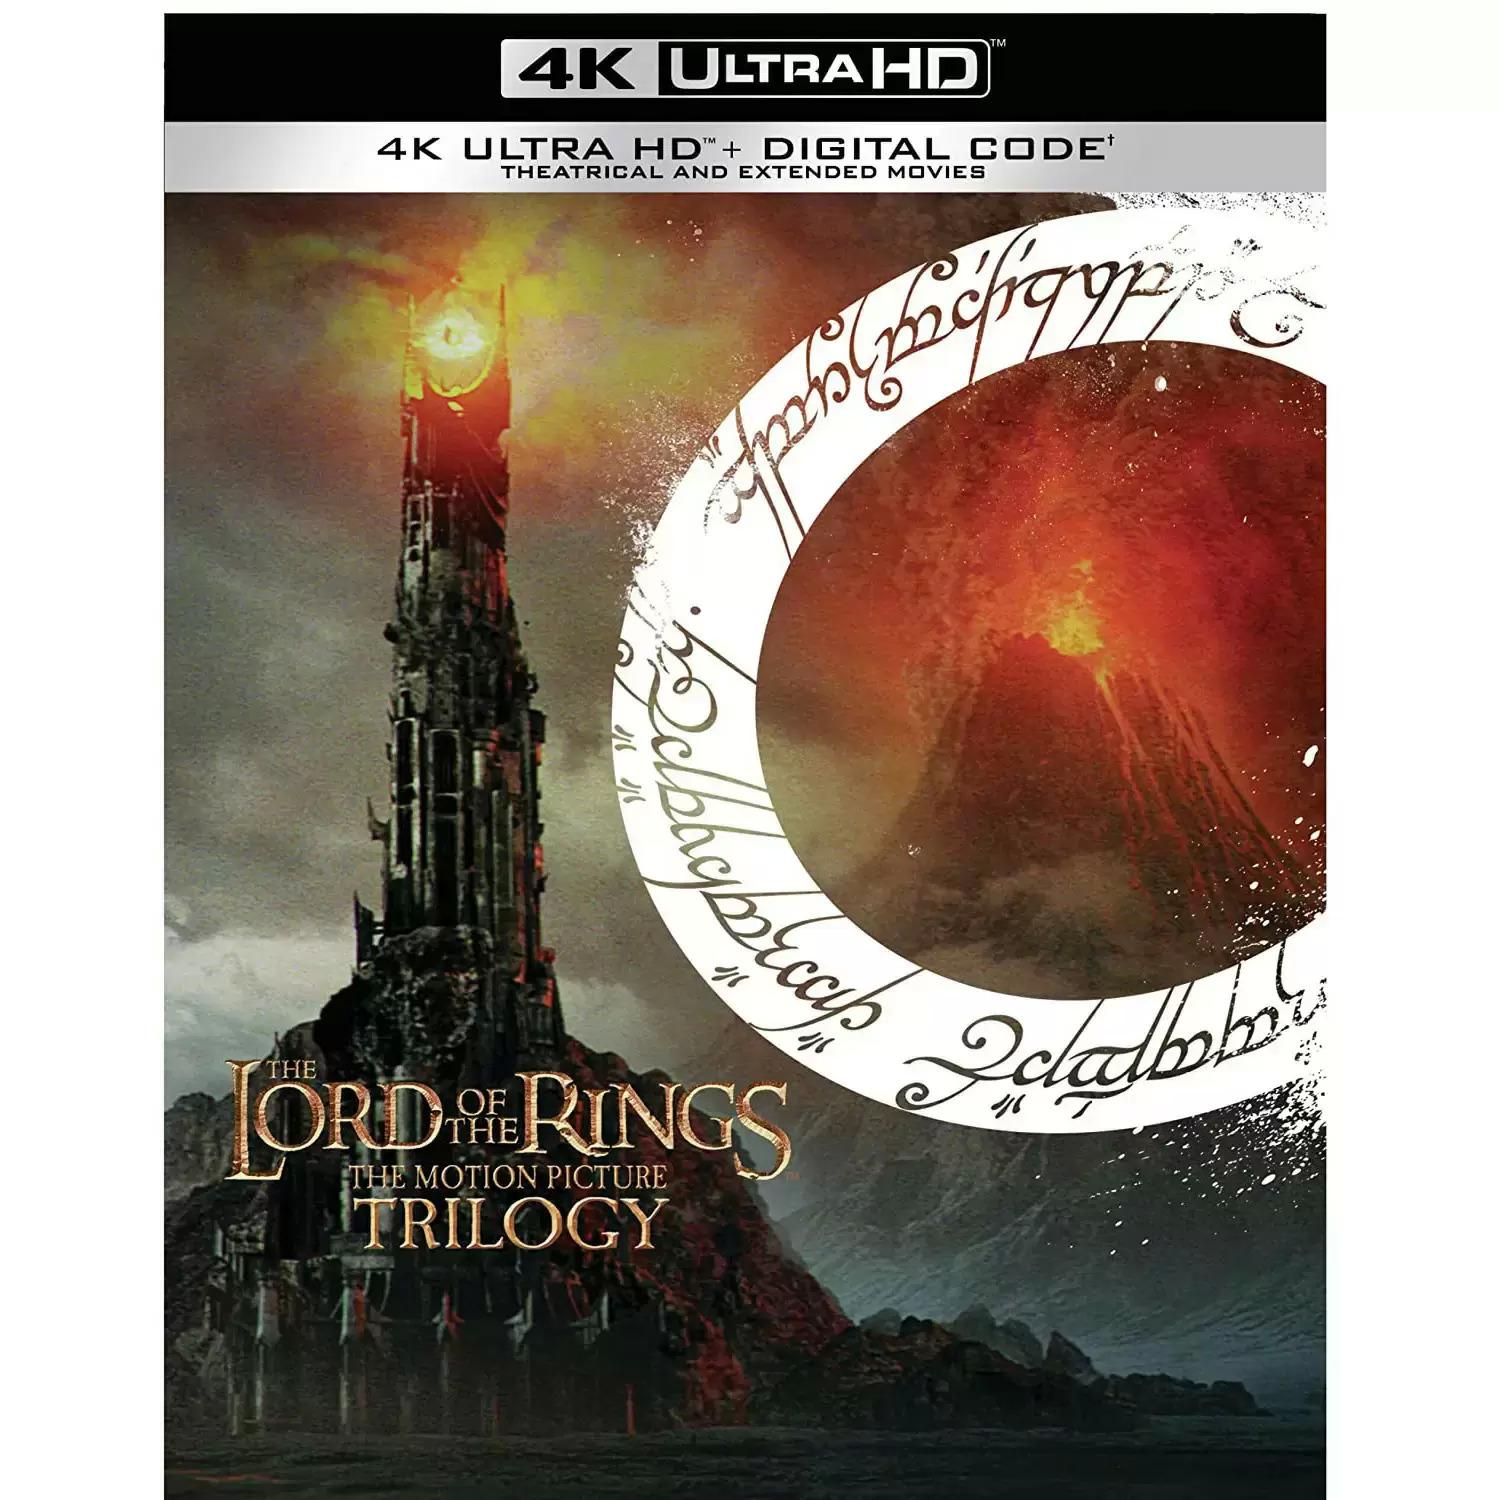 The Lord of the Rings Trilogy Extended + Theatrical Set Blu-ray for $43.99 Shipped